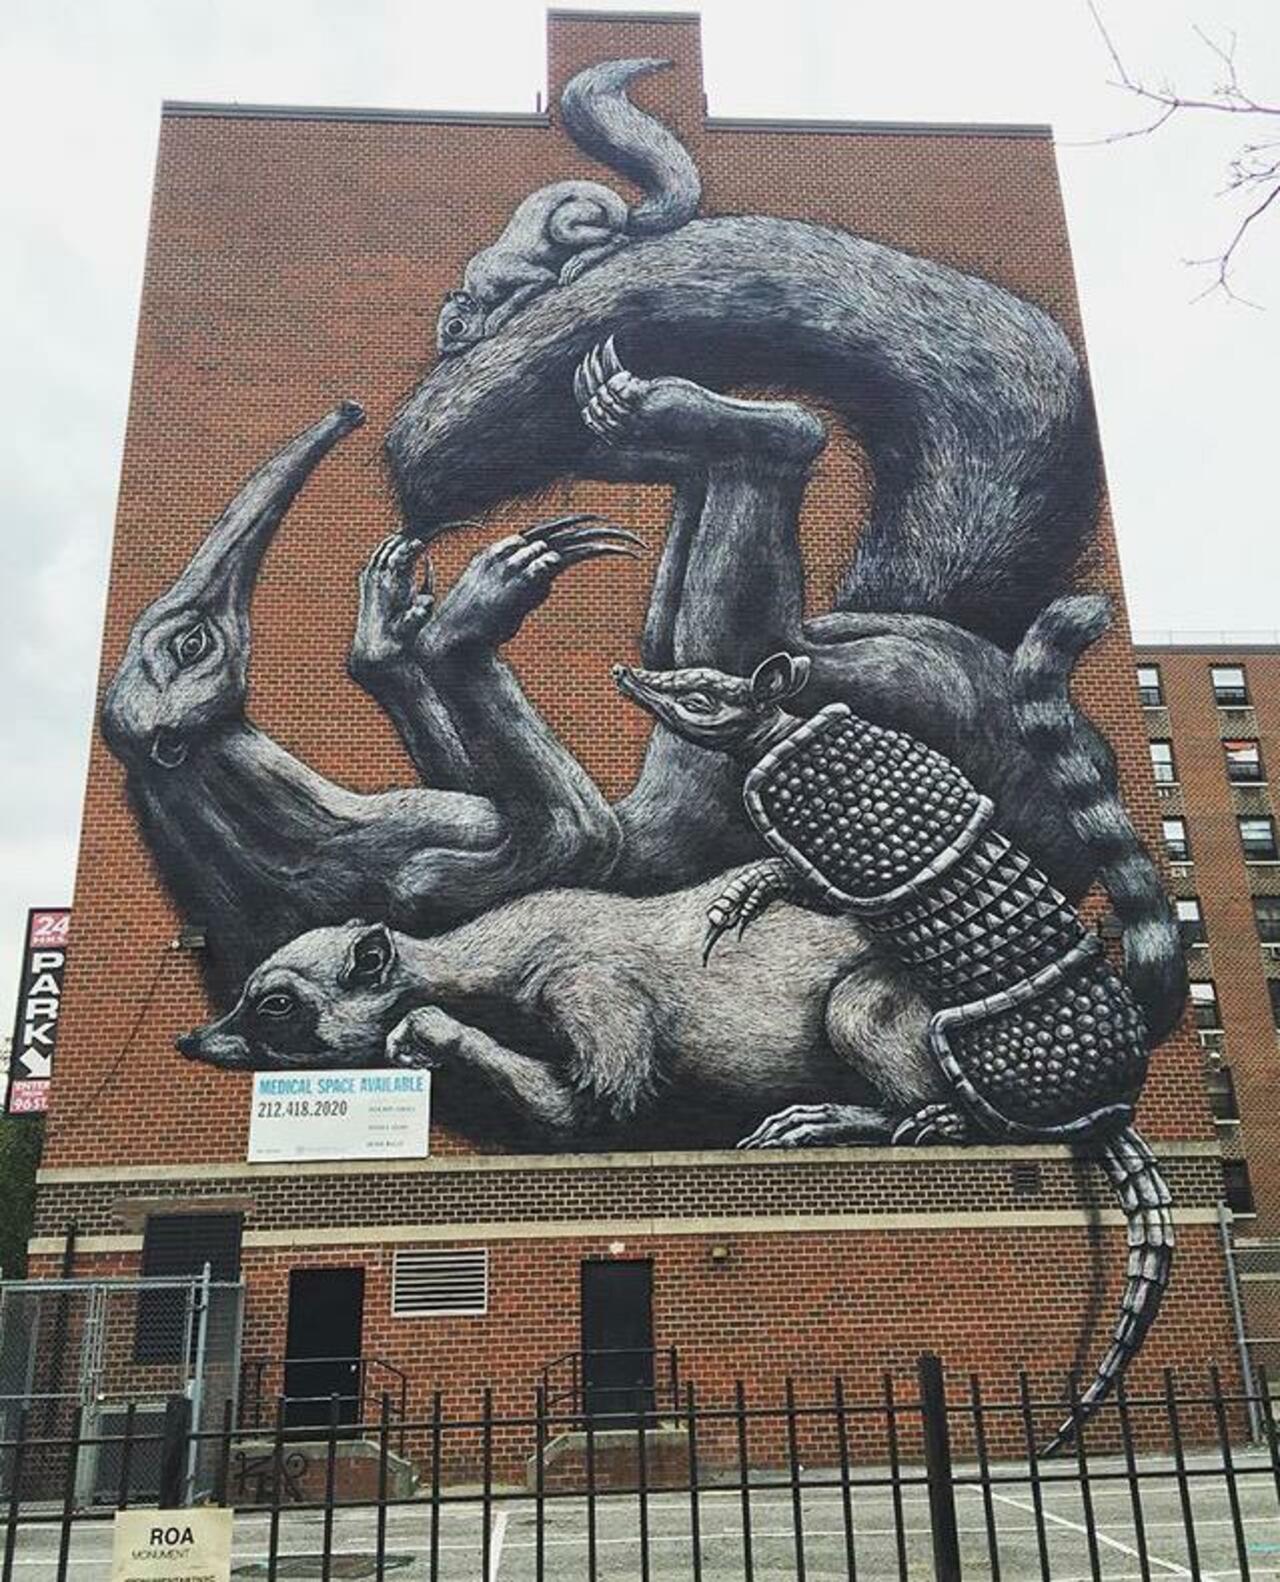 The completed new large scale Street Art wall by ROA in NYC

#art #graffiti #mural #streetart http://t.co/gDRcw9VAgi